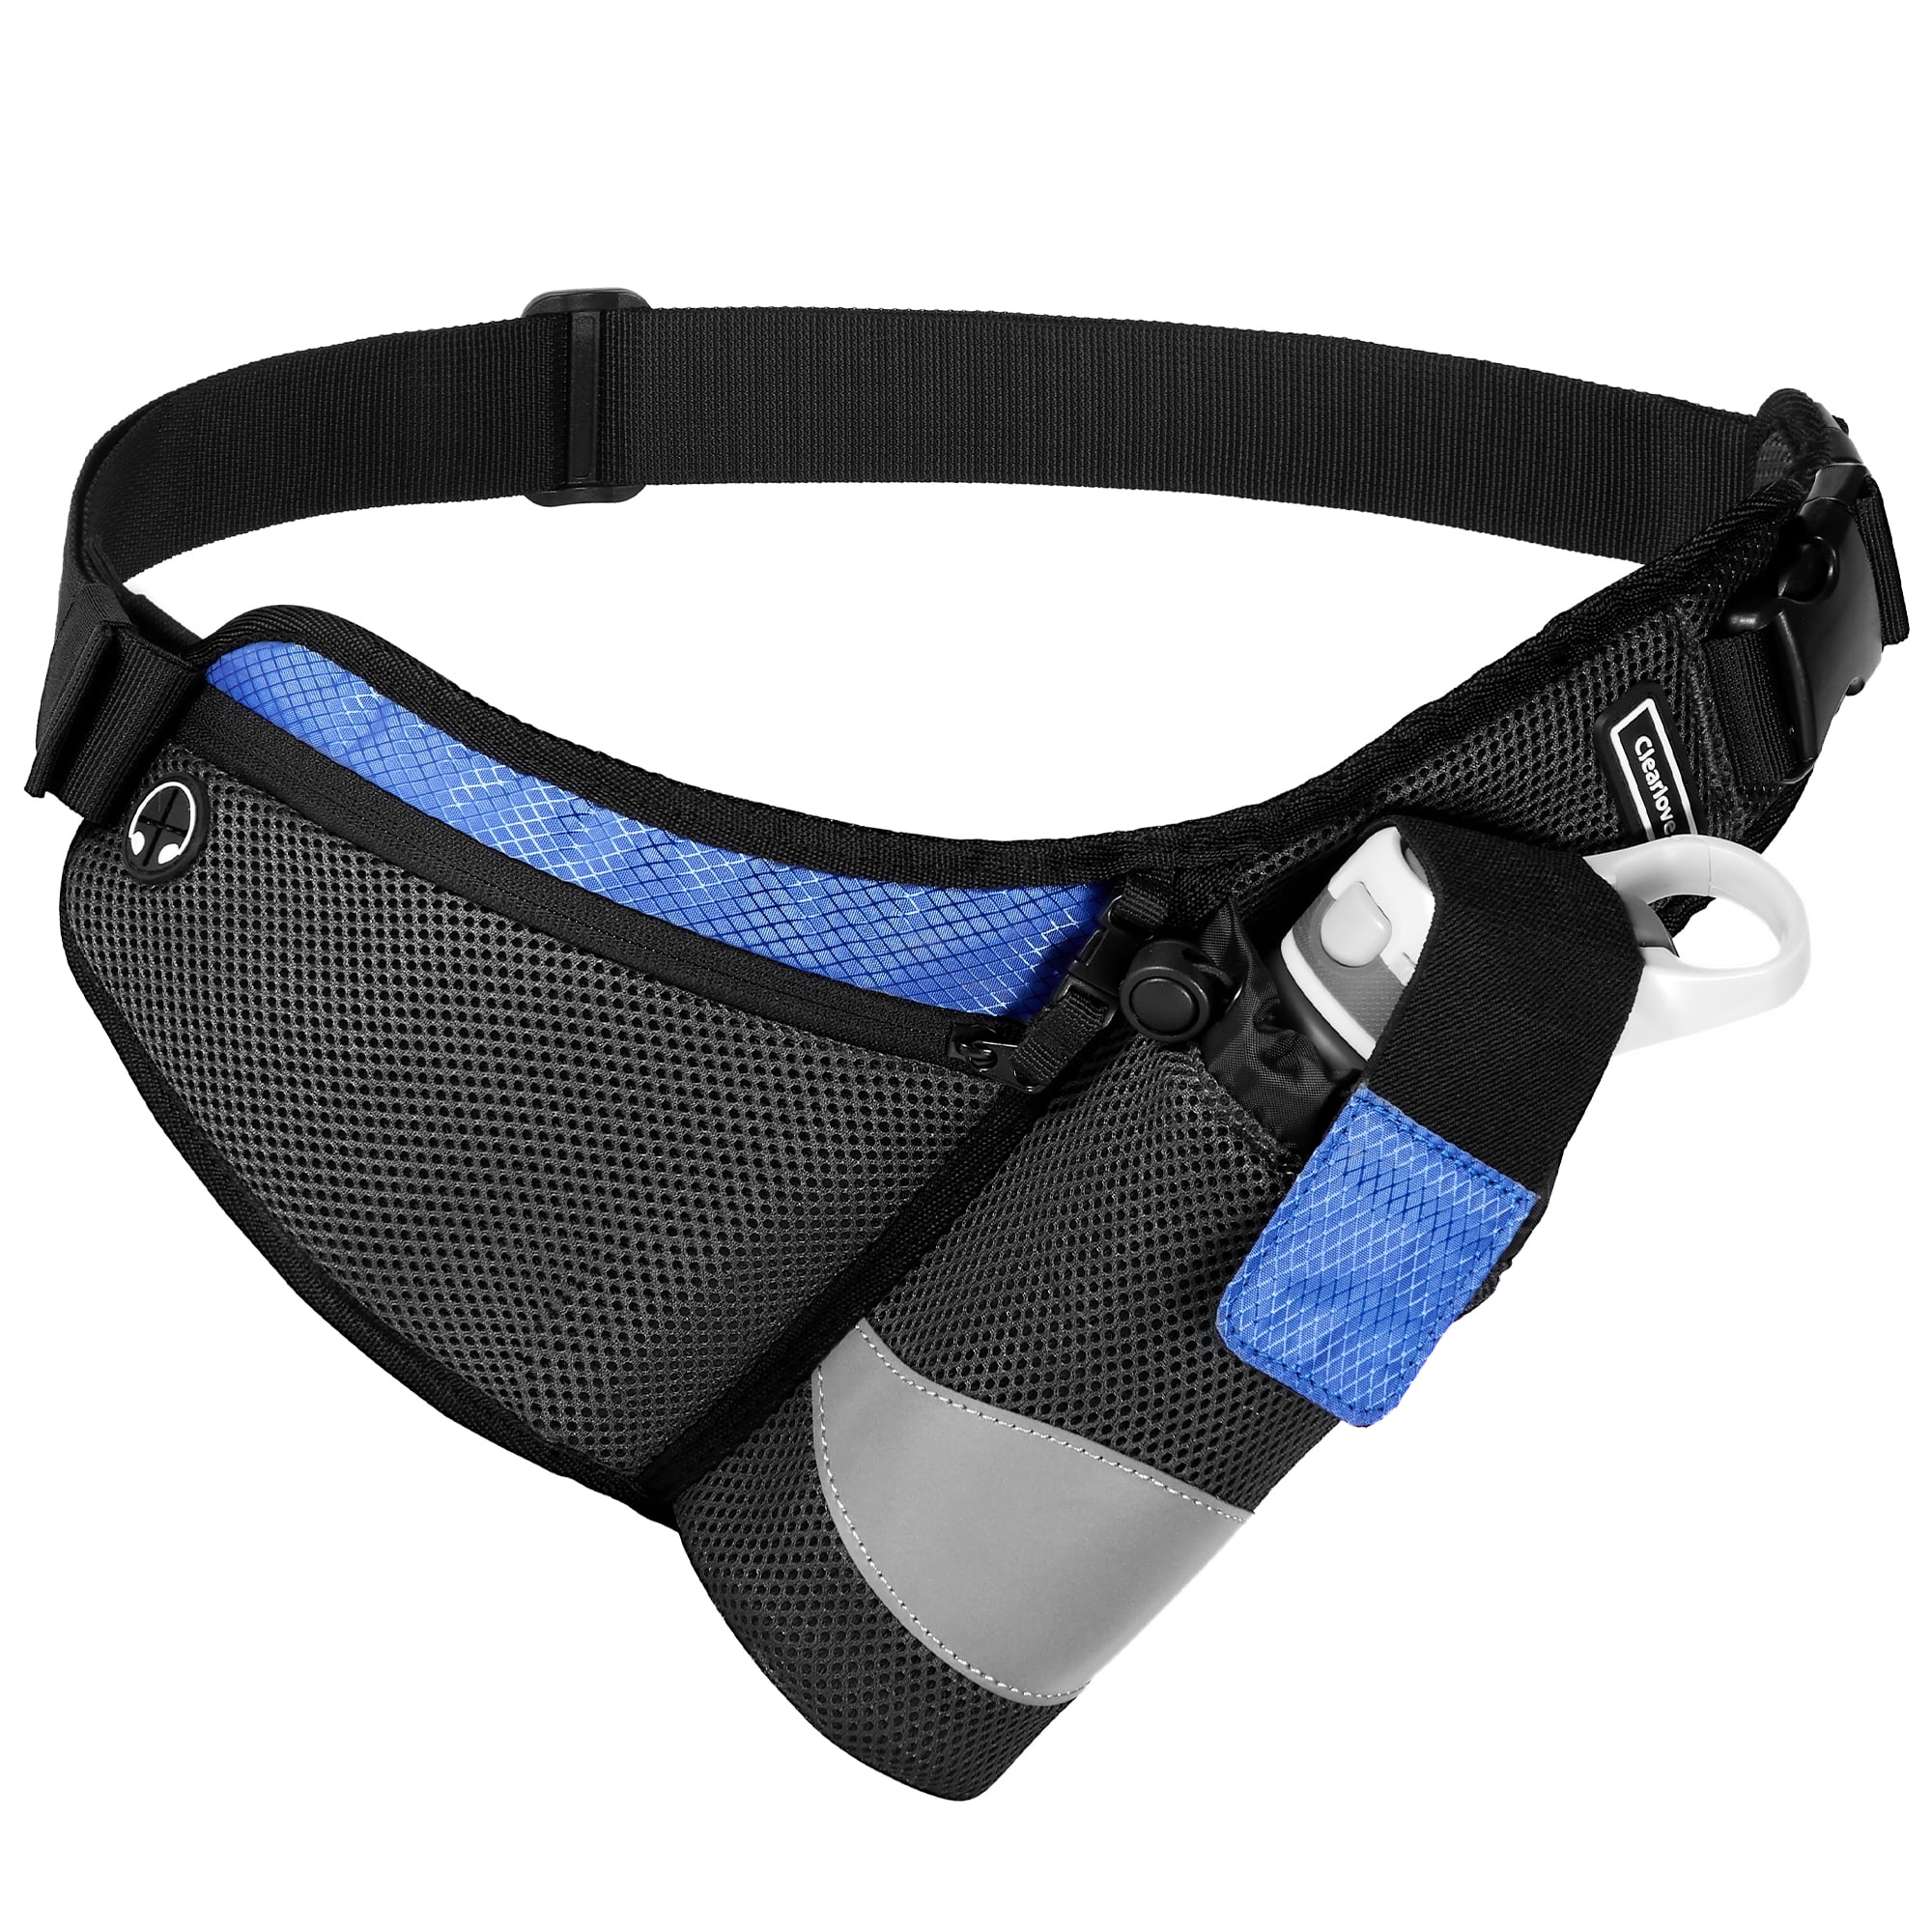 YUOTO Waist Pack with Water Bottle Holder for Running Walking Hiking  Hydration Belt